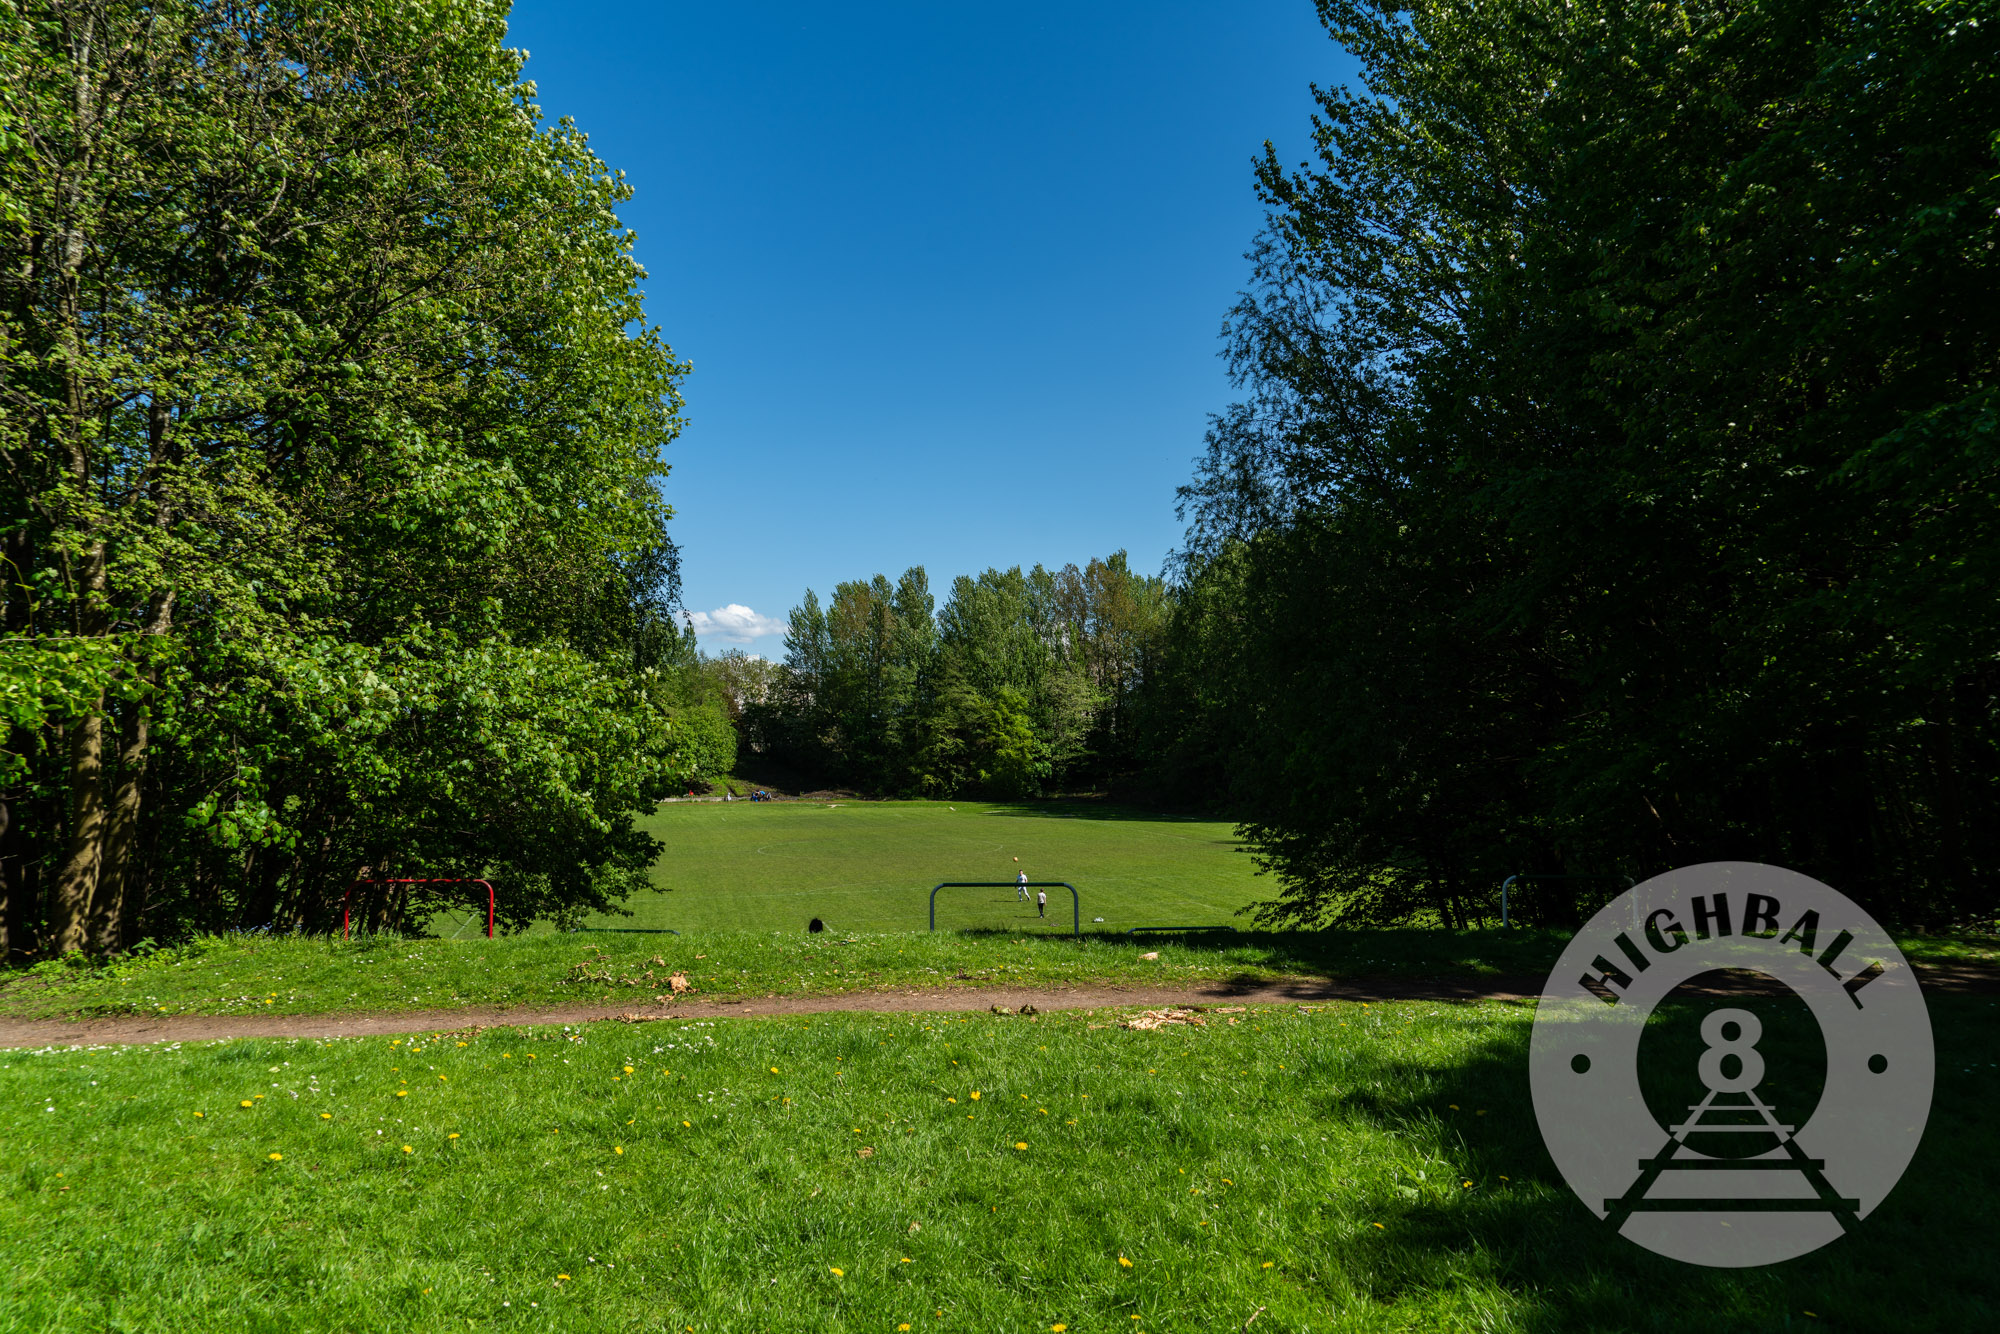 The old football ground at Cathkin Park, Crosshill, Glasgow, Scotland, UK, 2018.